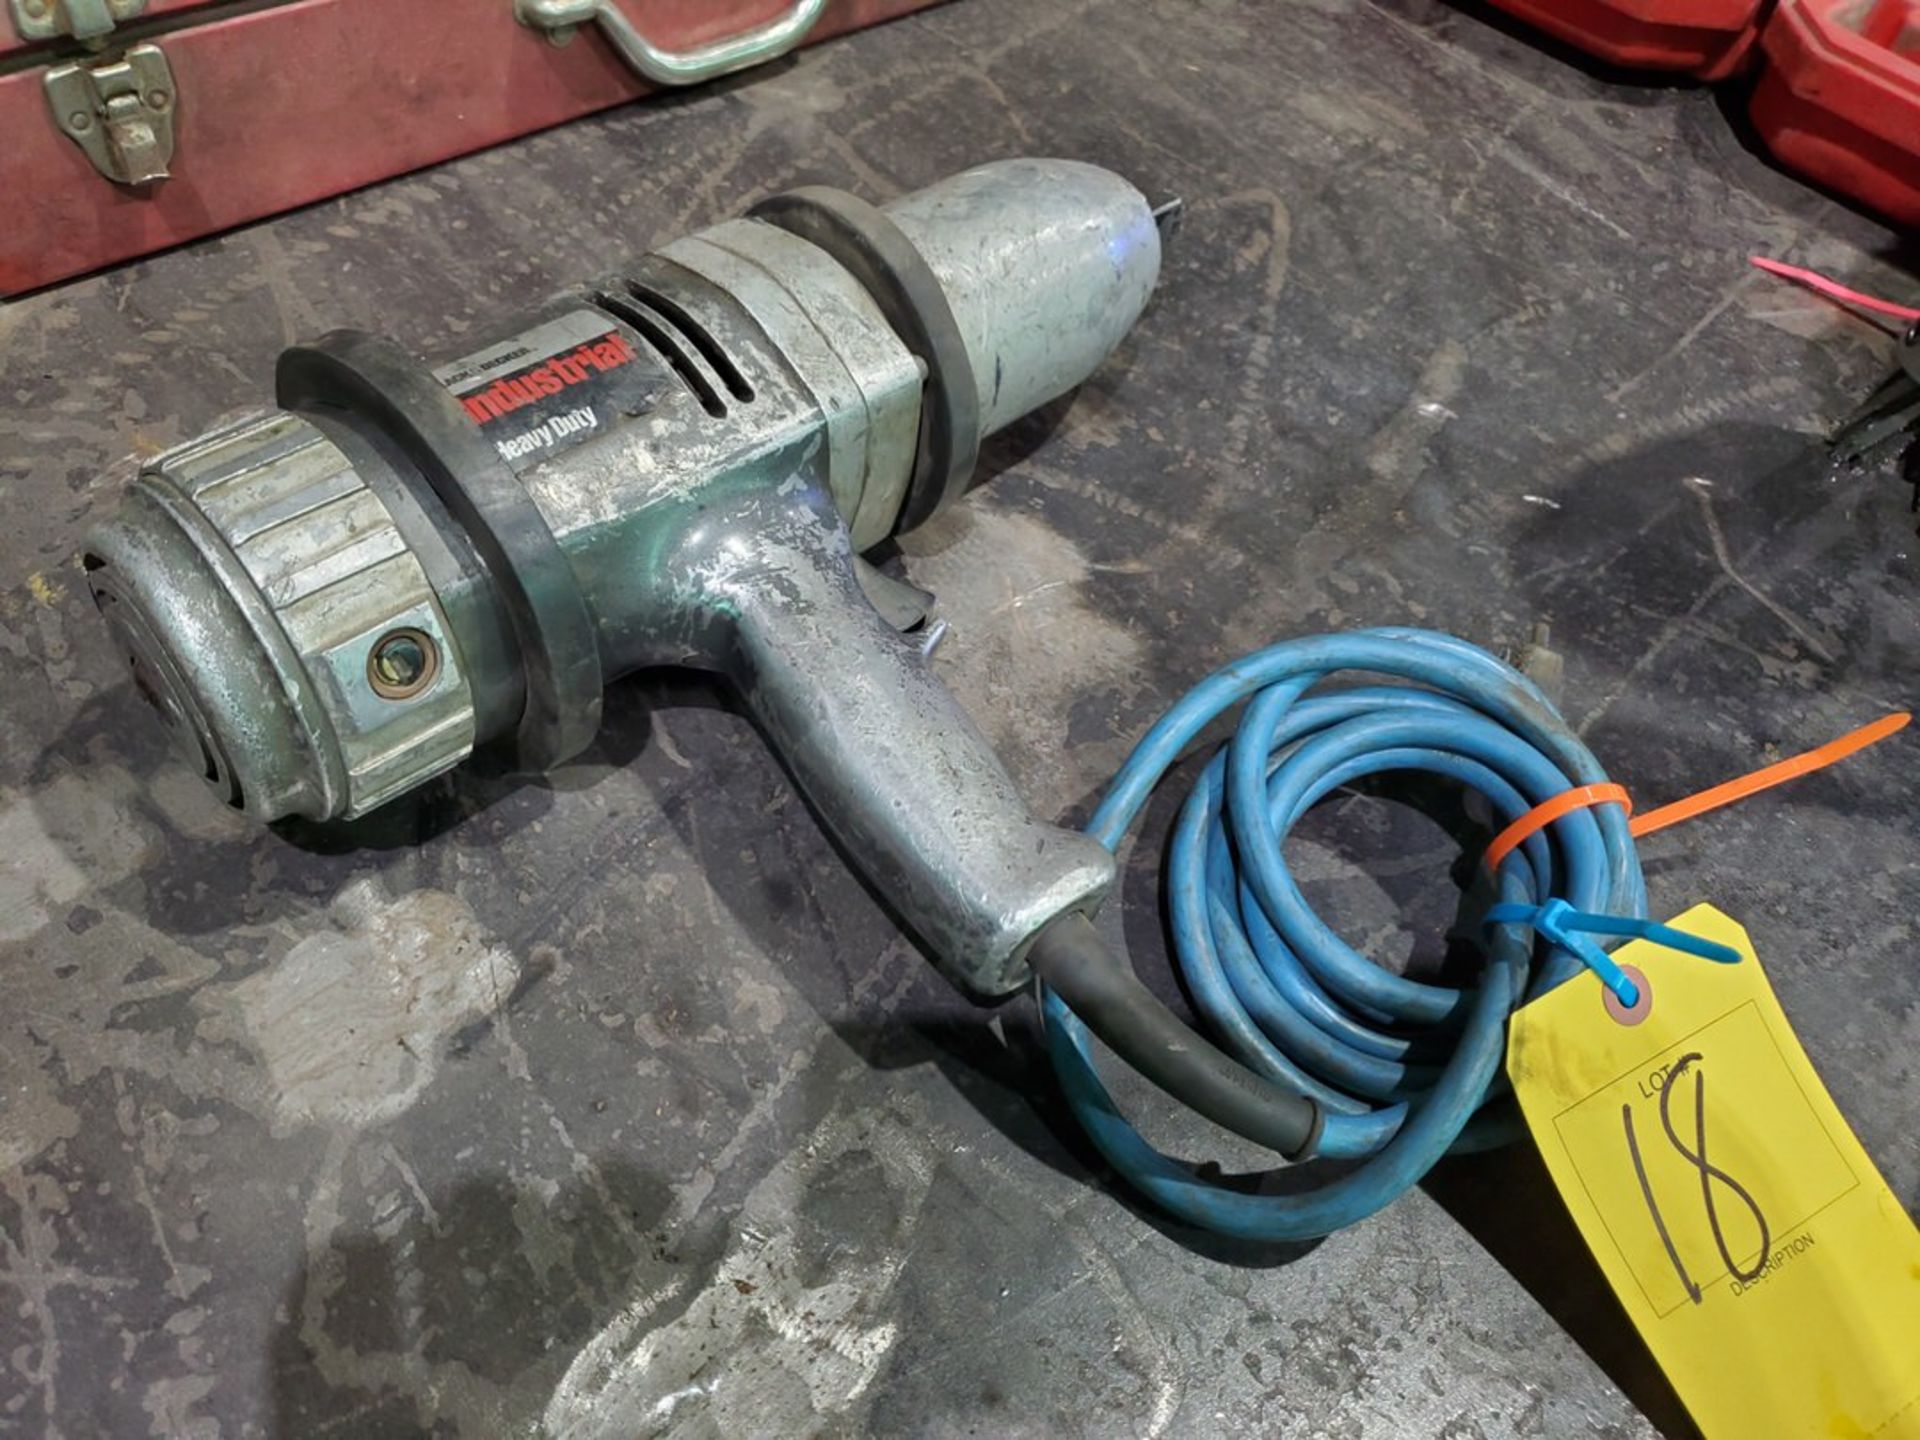 B&D 3/4" Impact Wrench 120V, 7.5A - Image 2 of 5